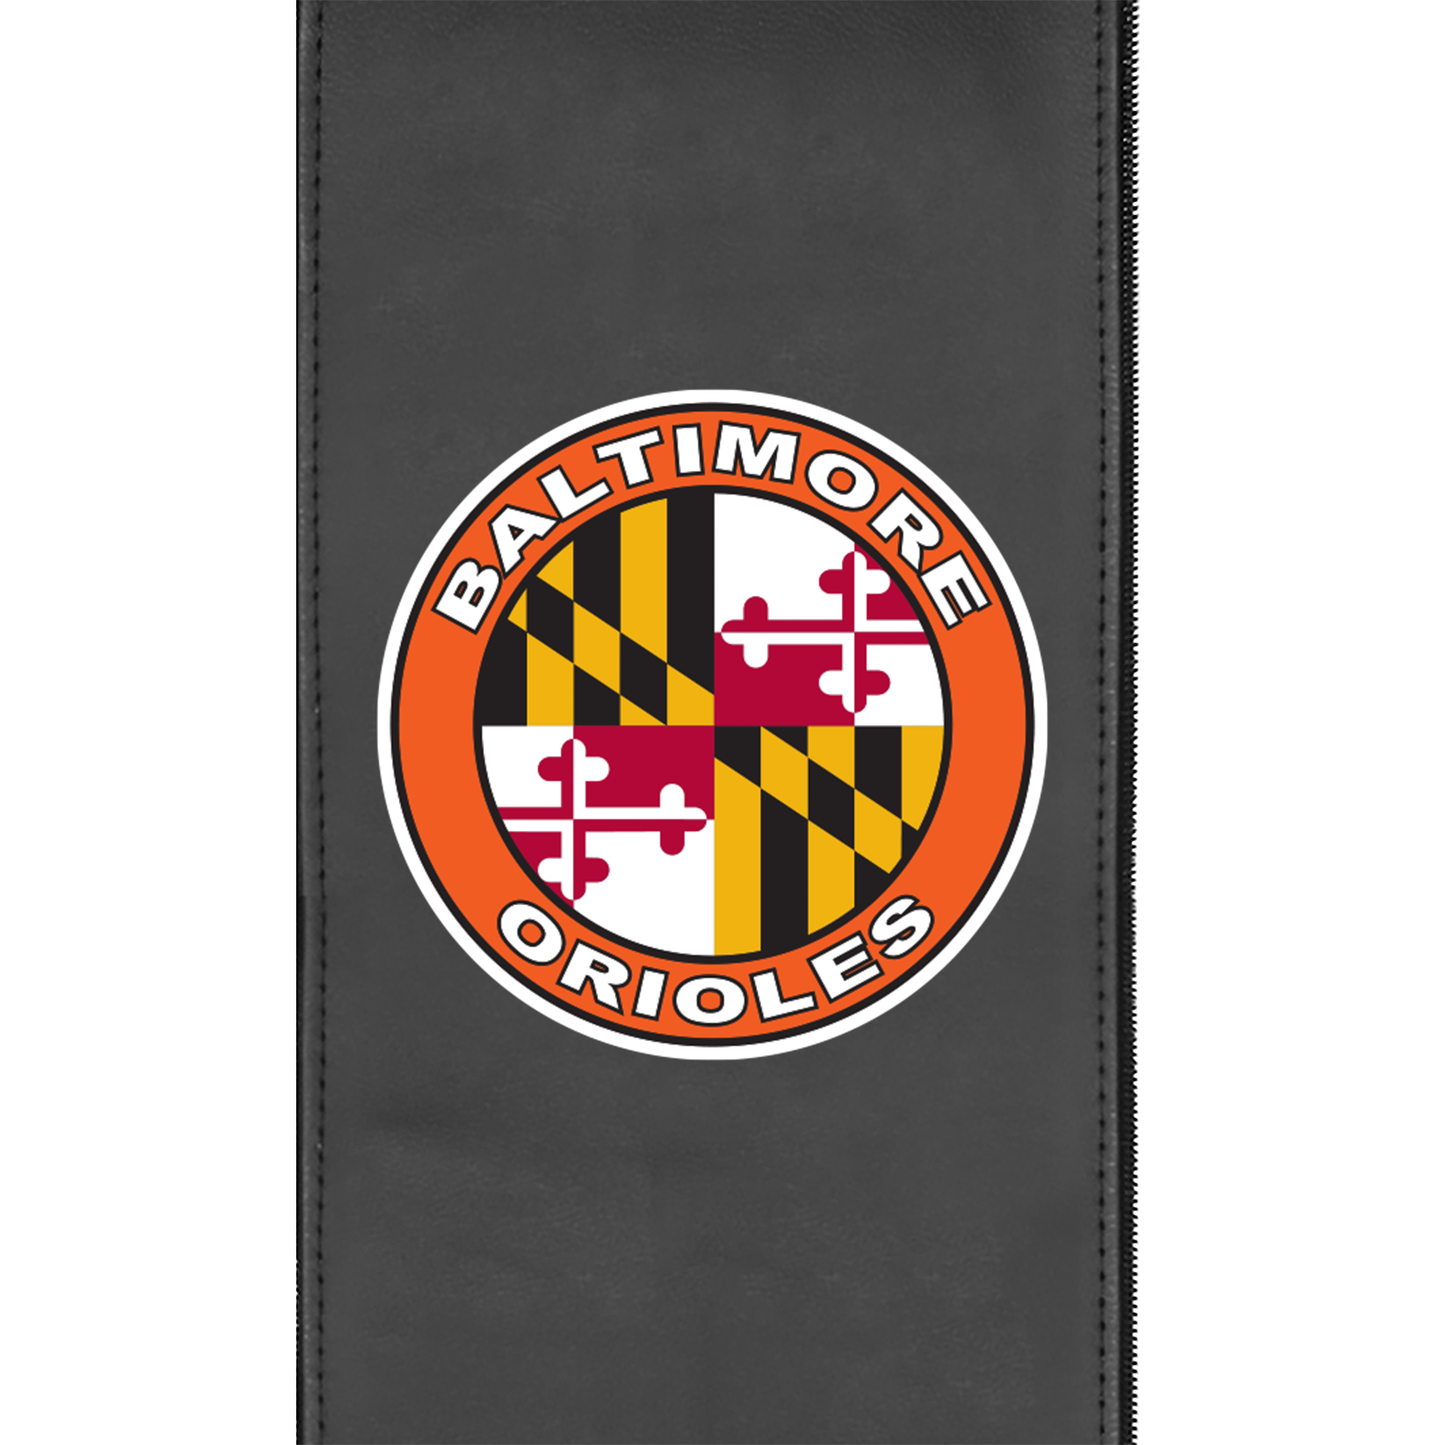 Baltimore Orioles Cooperstown Primary Logo Panel